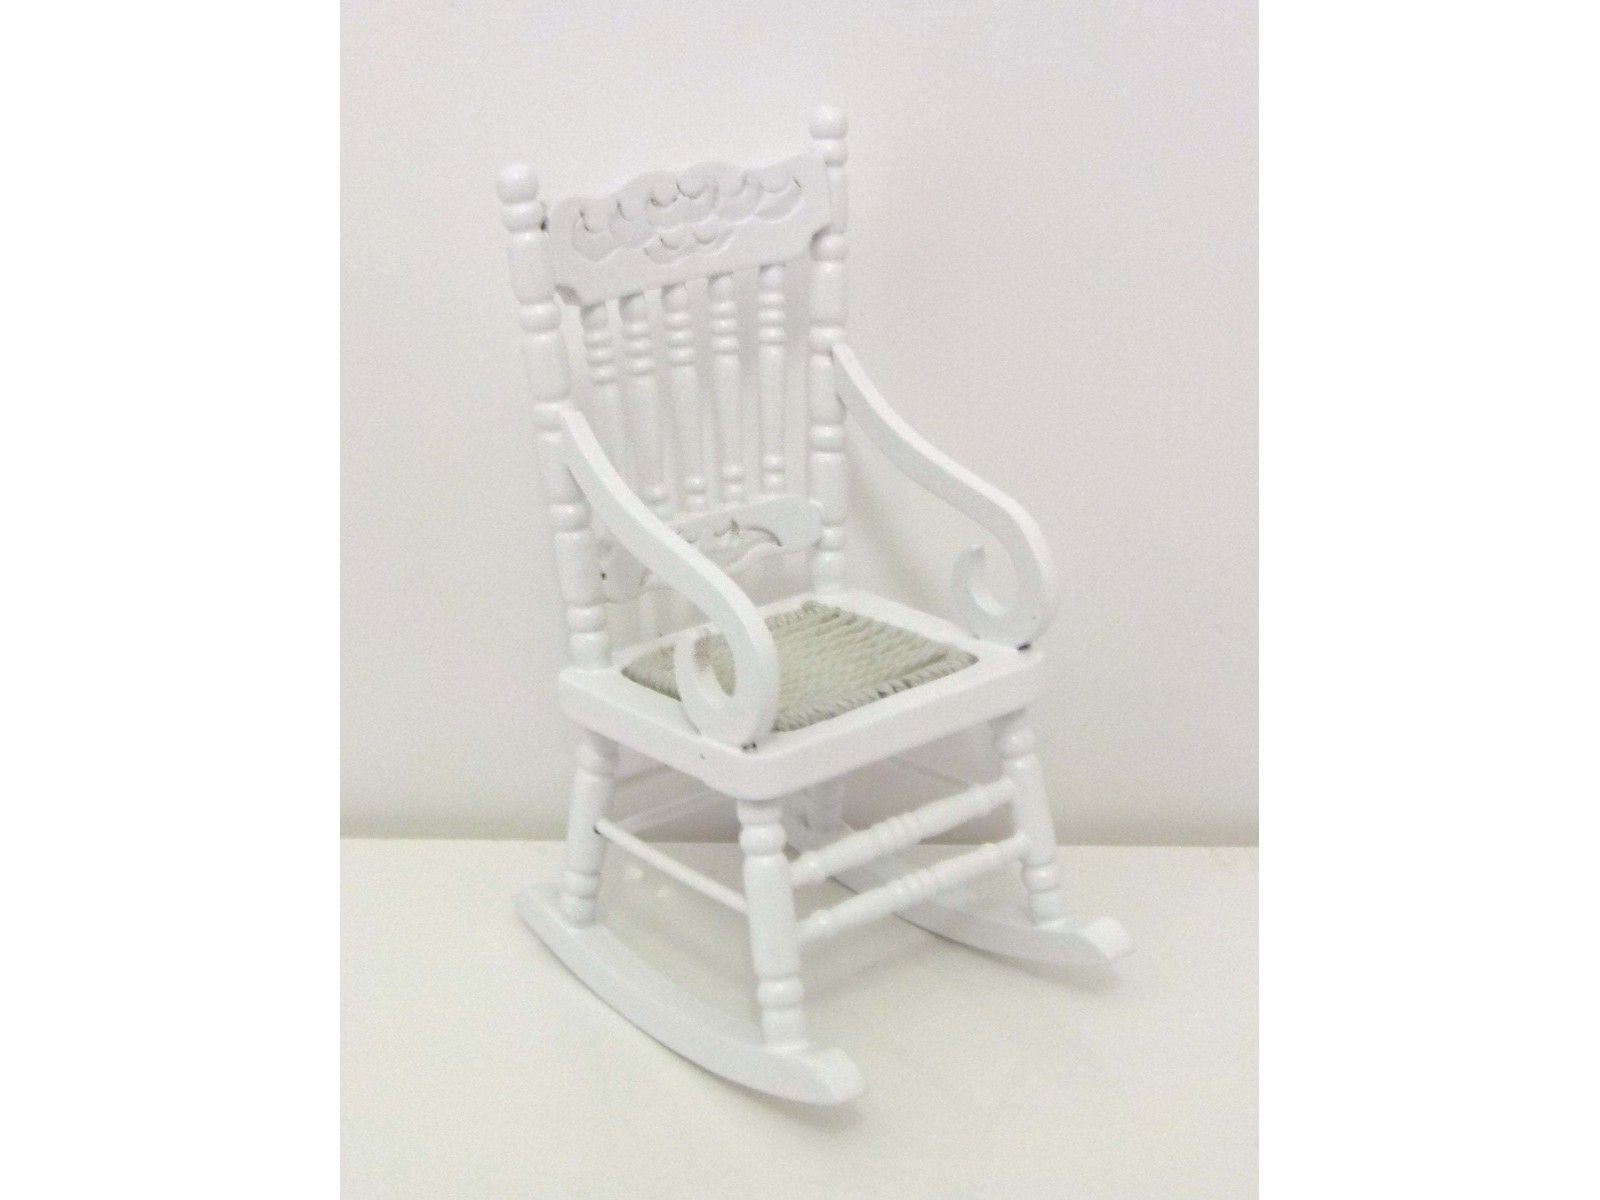 Dolls House Miniature Furniture White Wooden Rocking Chair With Woven Seat With White Wood Rocking Chairs (View 17 of 20)